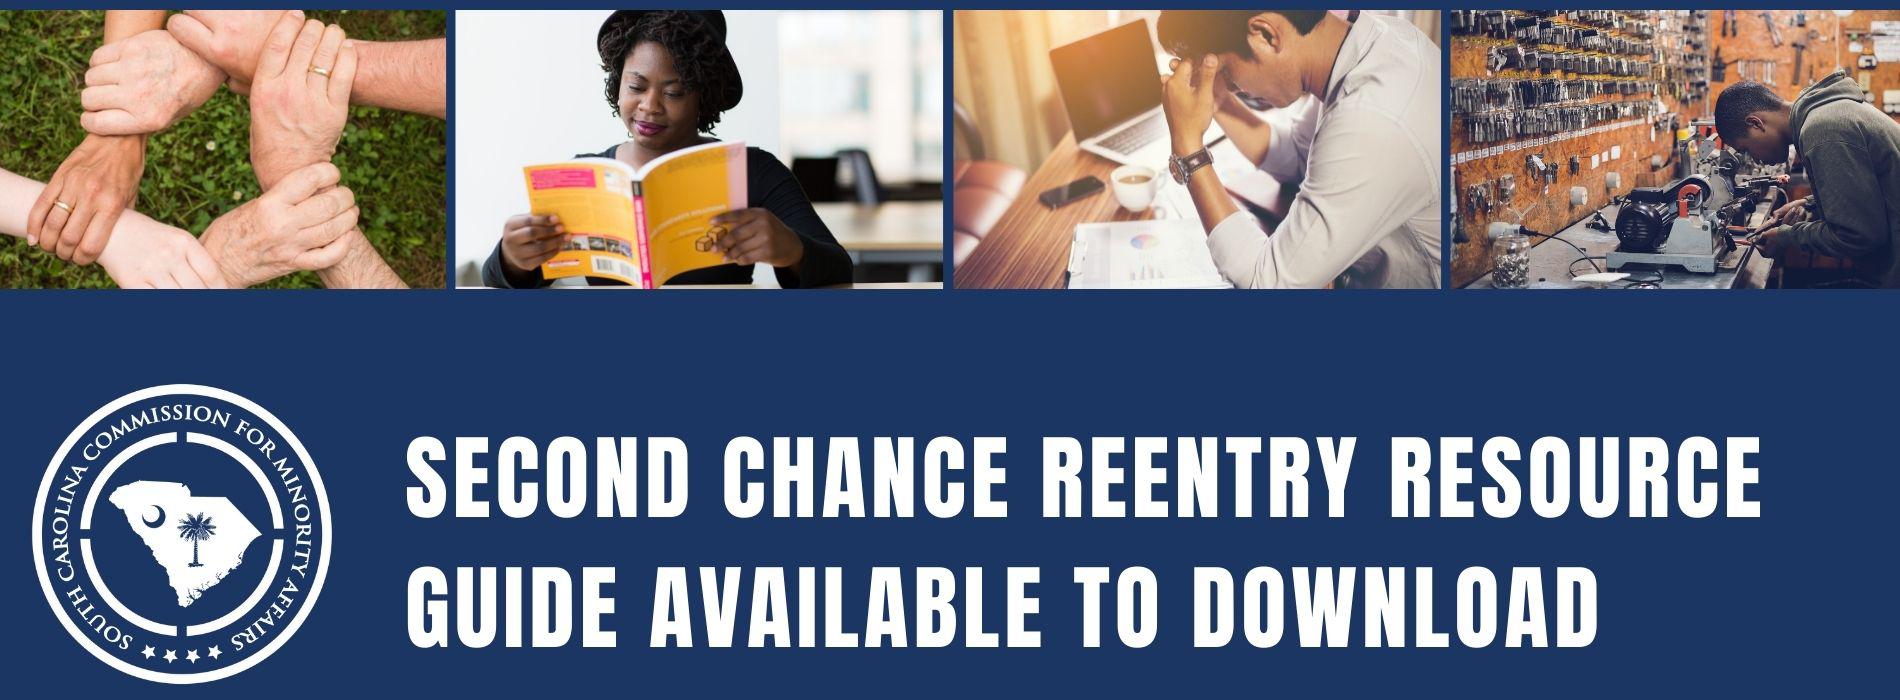 Second Chance Resource Guide Available